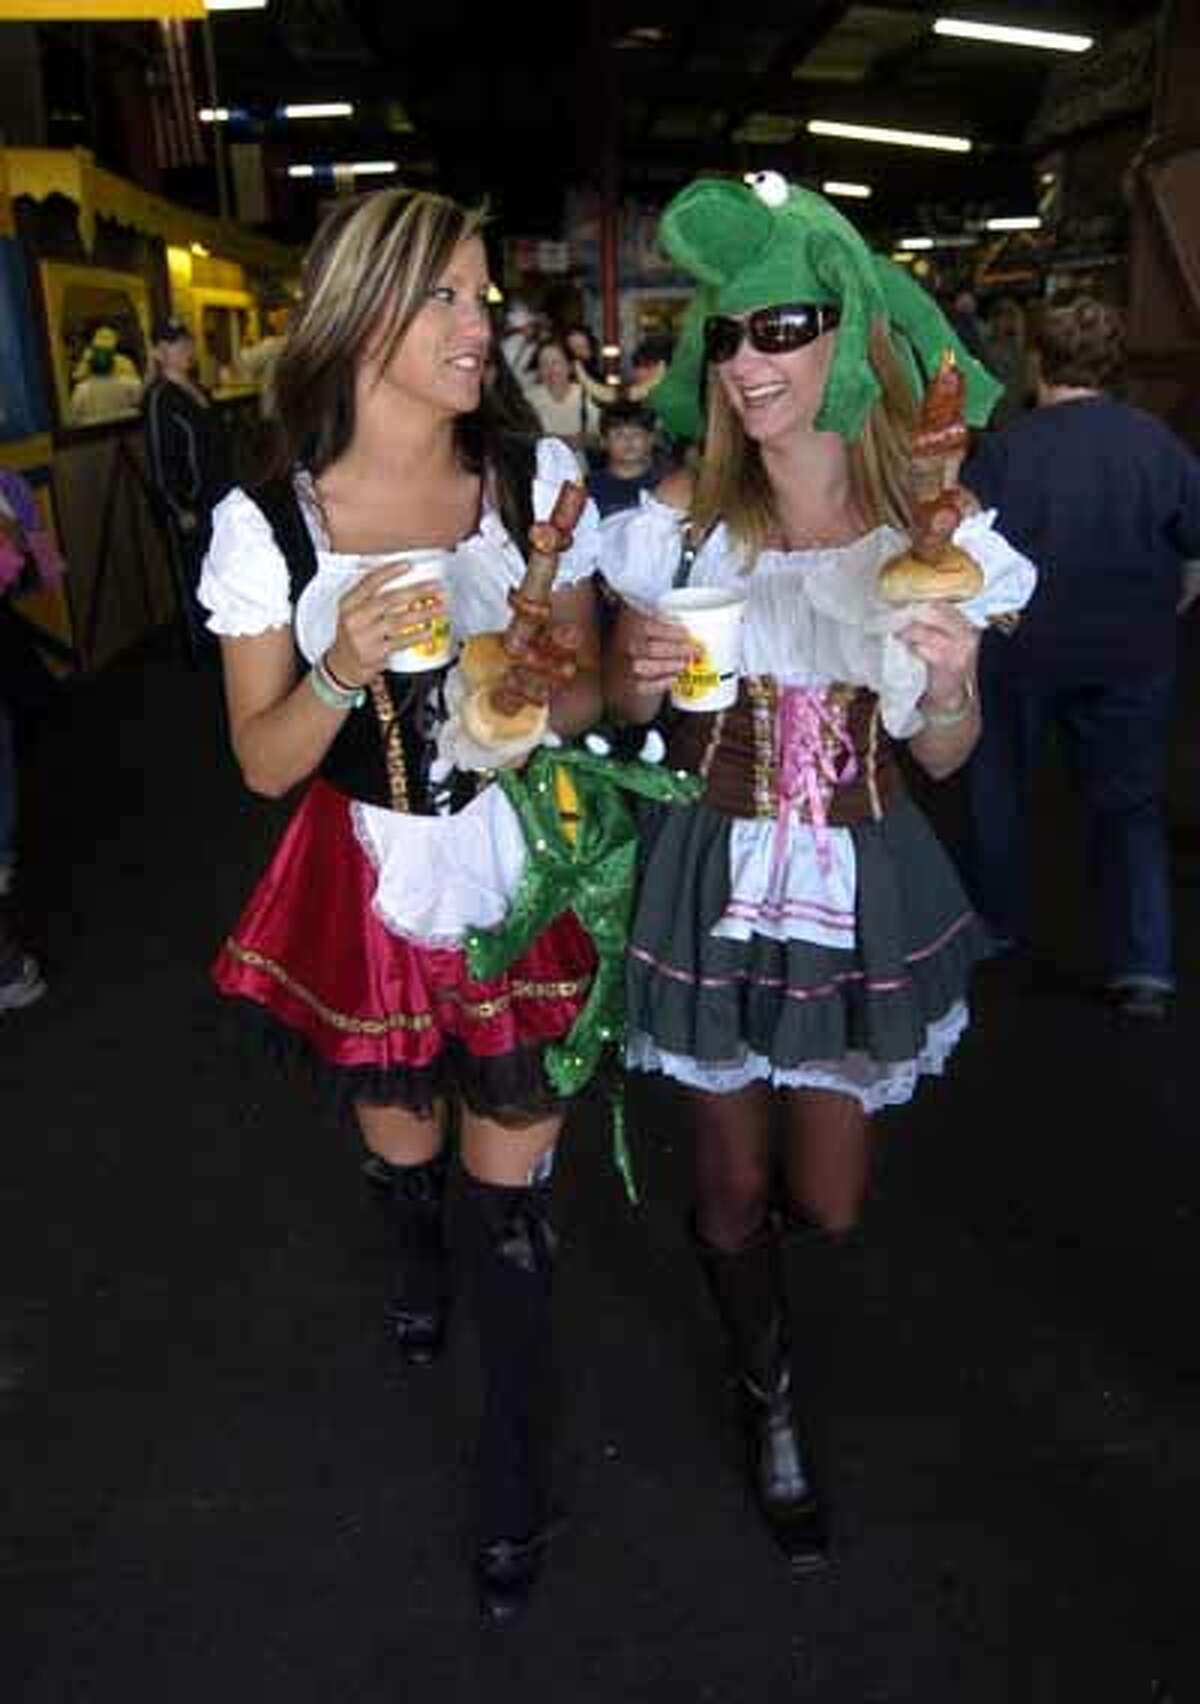 Shannon (left) and Amanda Smith stroll through Wurstfest with the traditional beer and sausages, Oct. 30, 2010.